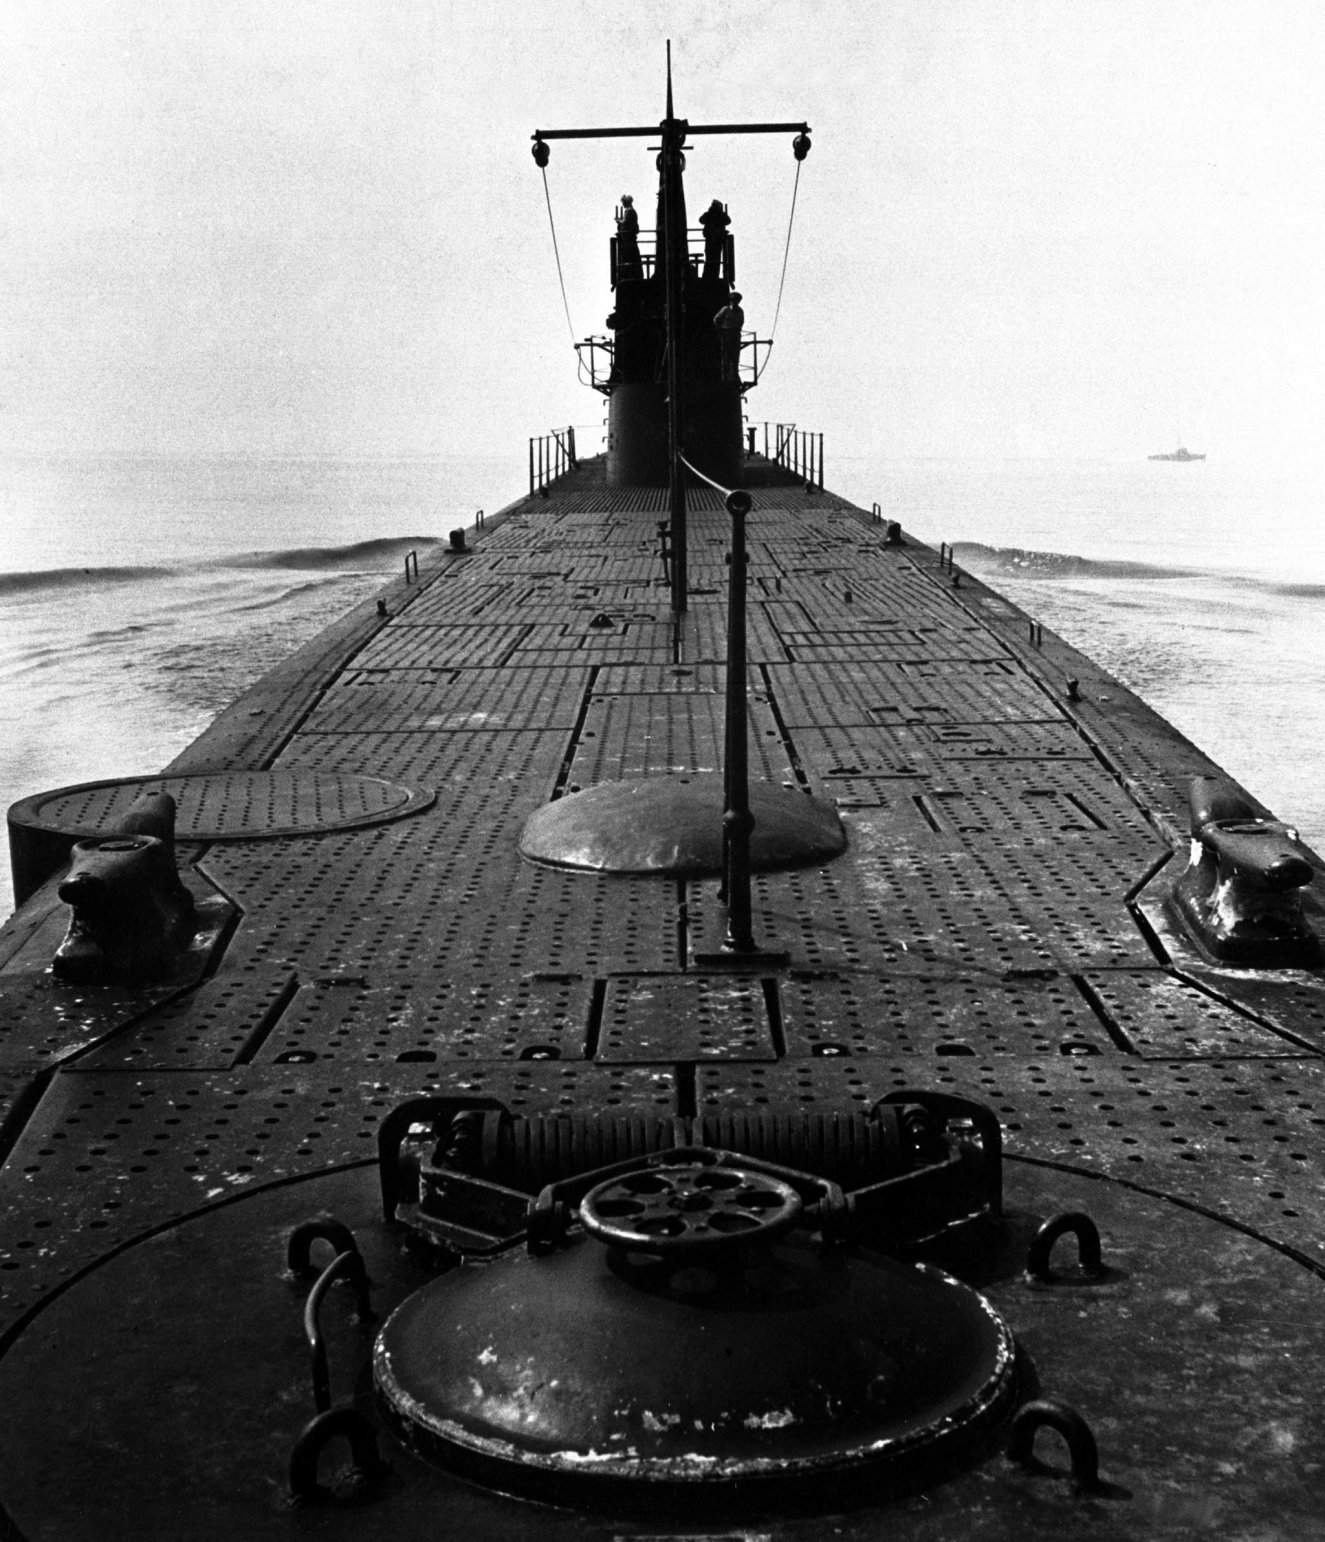 Looking forward along deck from stern of USS Marlin, off coast of New London, Connecticut, United States, Aug 1943